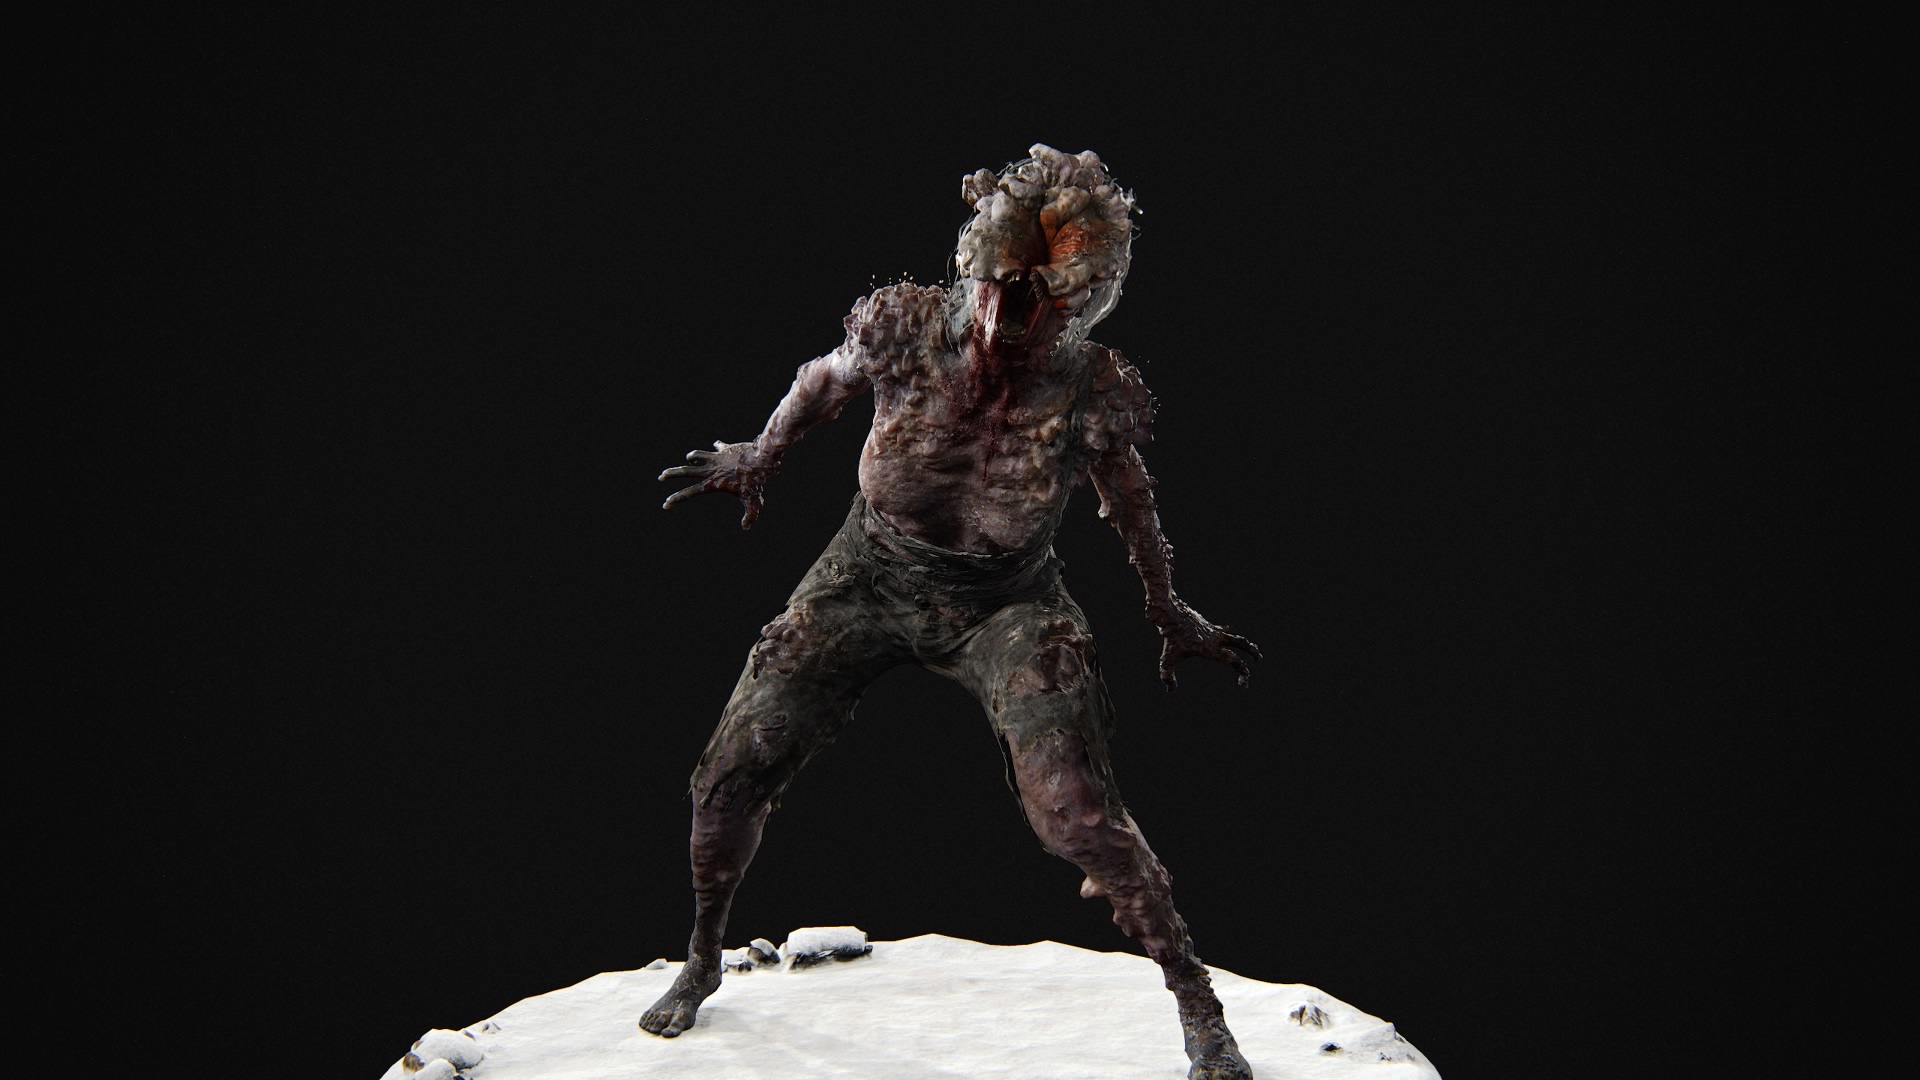 The Rat King model in The Last of Us Part II